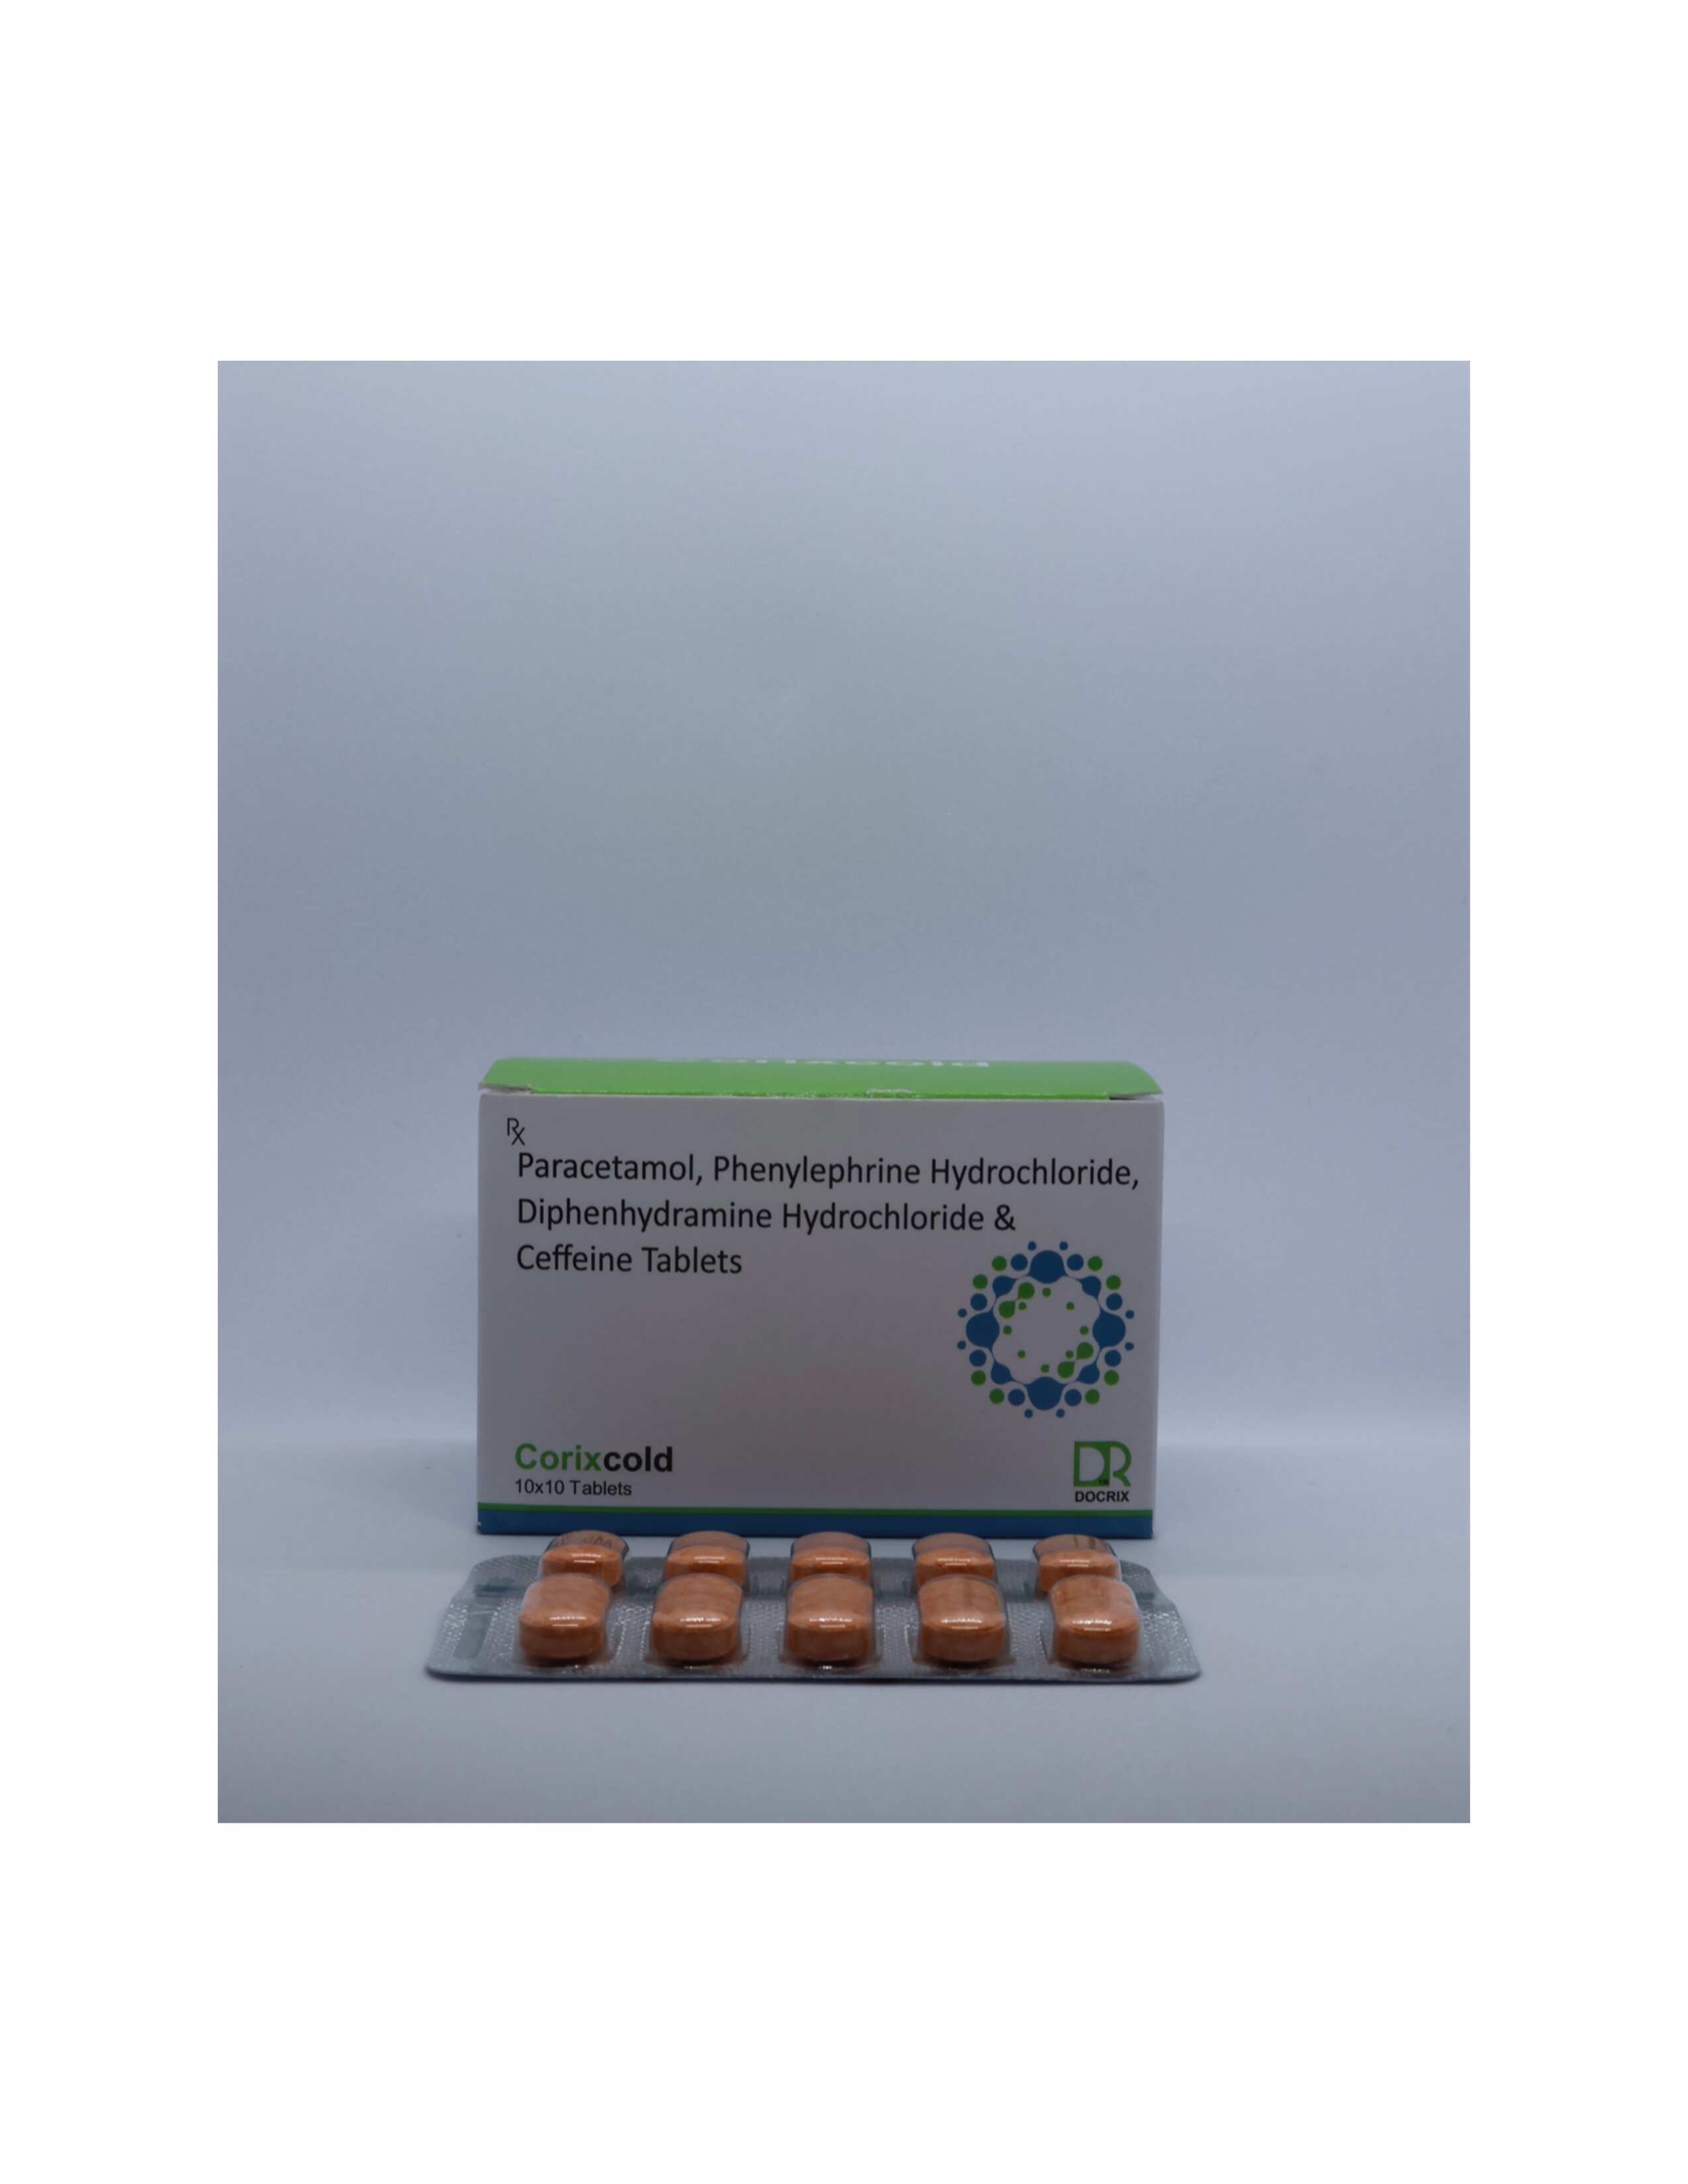 Product Name: Corixcold, Compositions of Corixcold are Paracetamol Phenylephrine Hydrochloride, Diphenhydramine Hydrochloride & Ceffeine Tablets - Docrix Healthcare